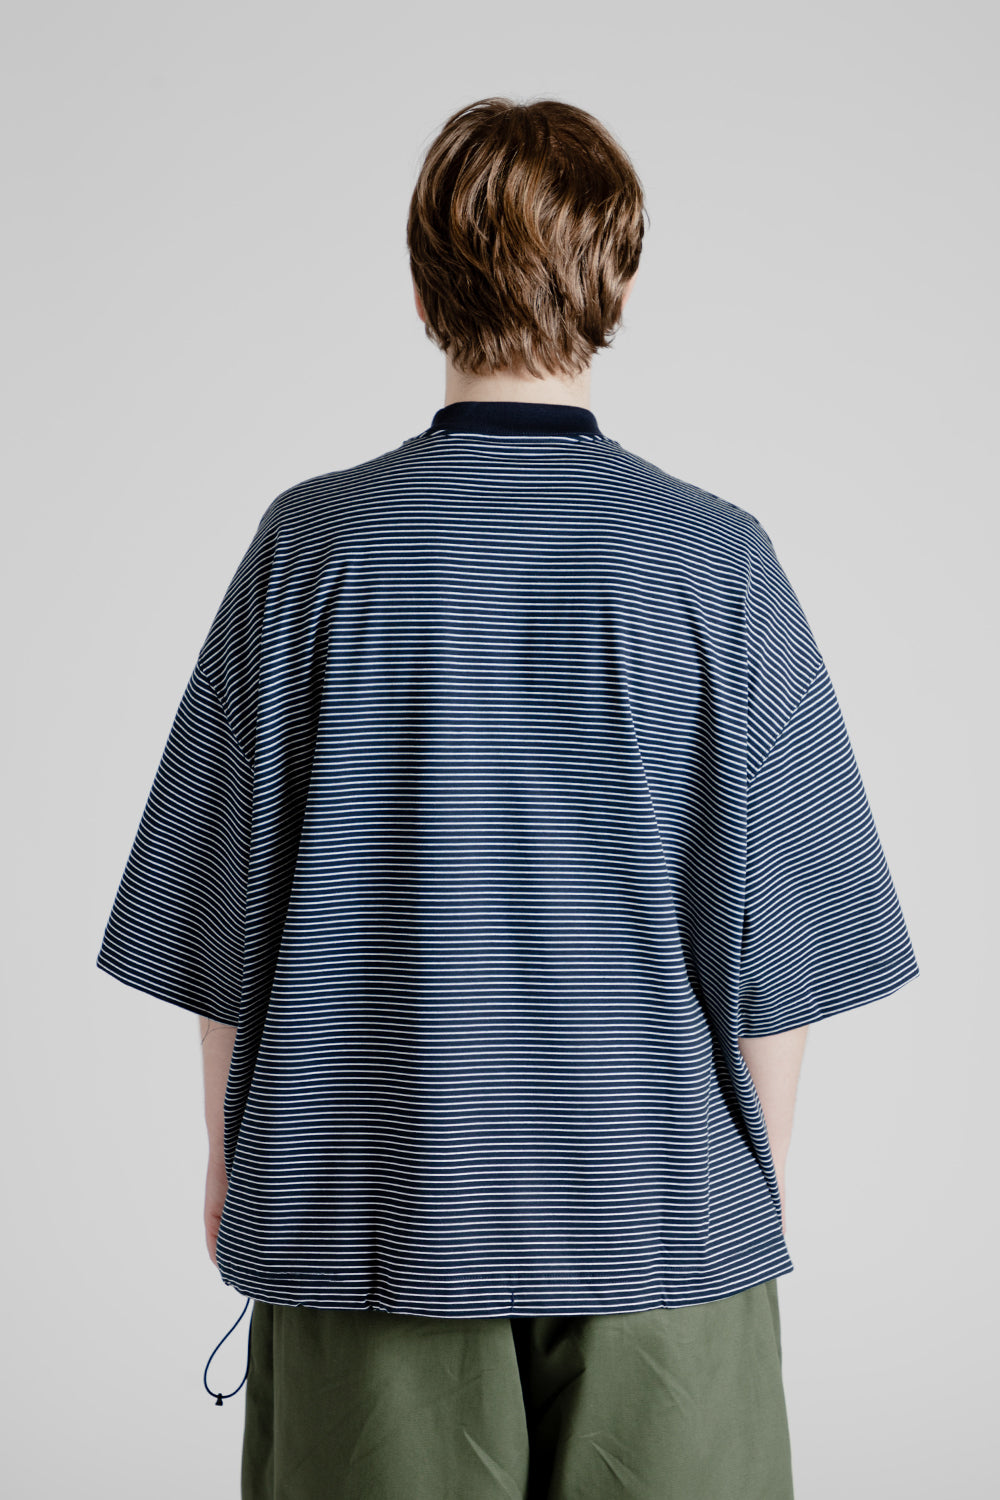 Is-Ness Balloon Border S/S T-Shirts in Navy